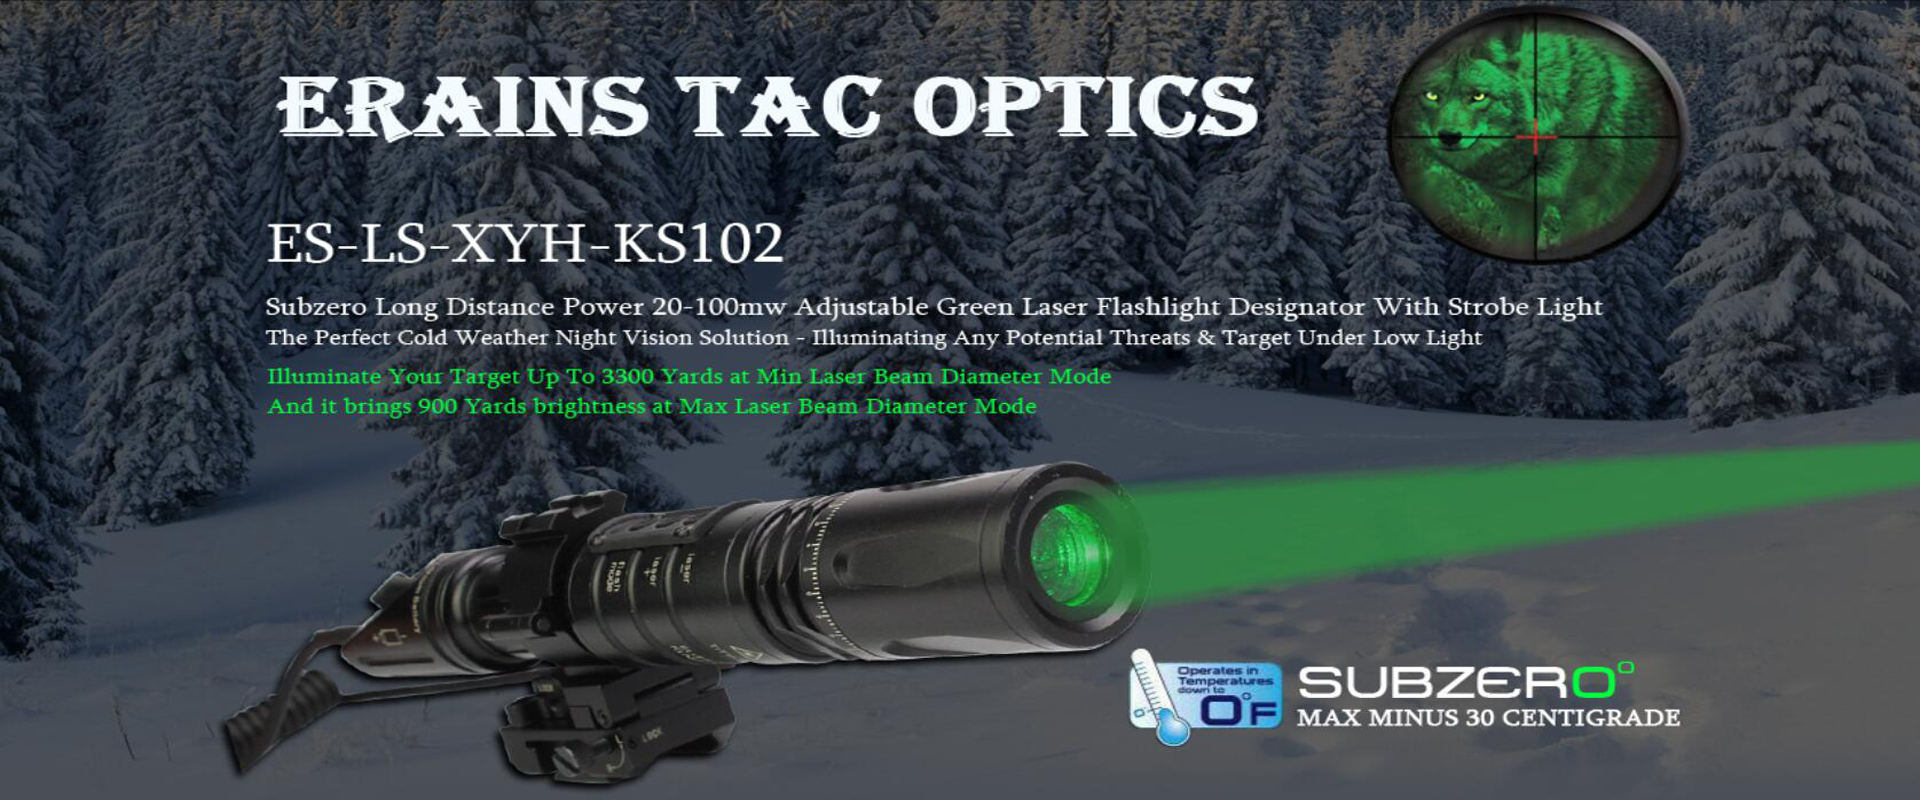 All the civilian grade and military or tactical purpose green laser designators are available.